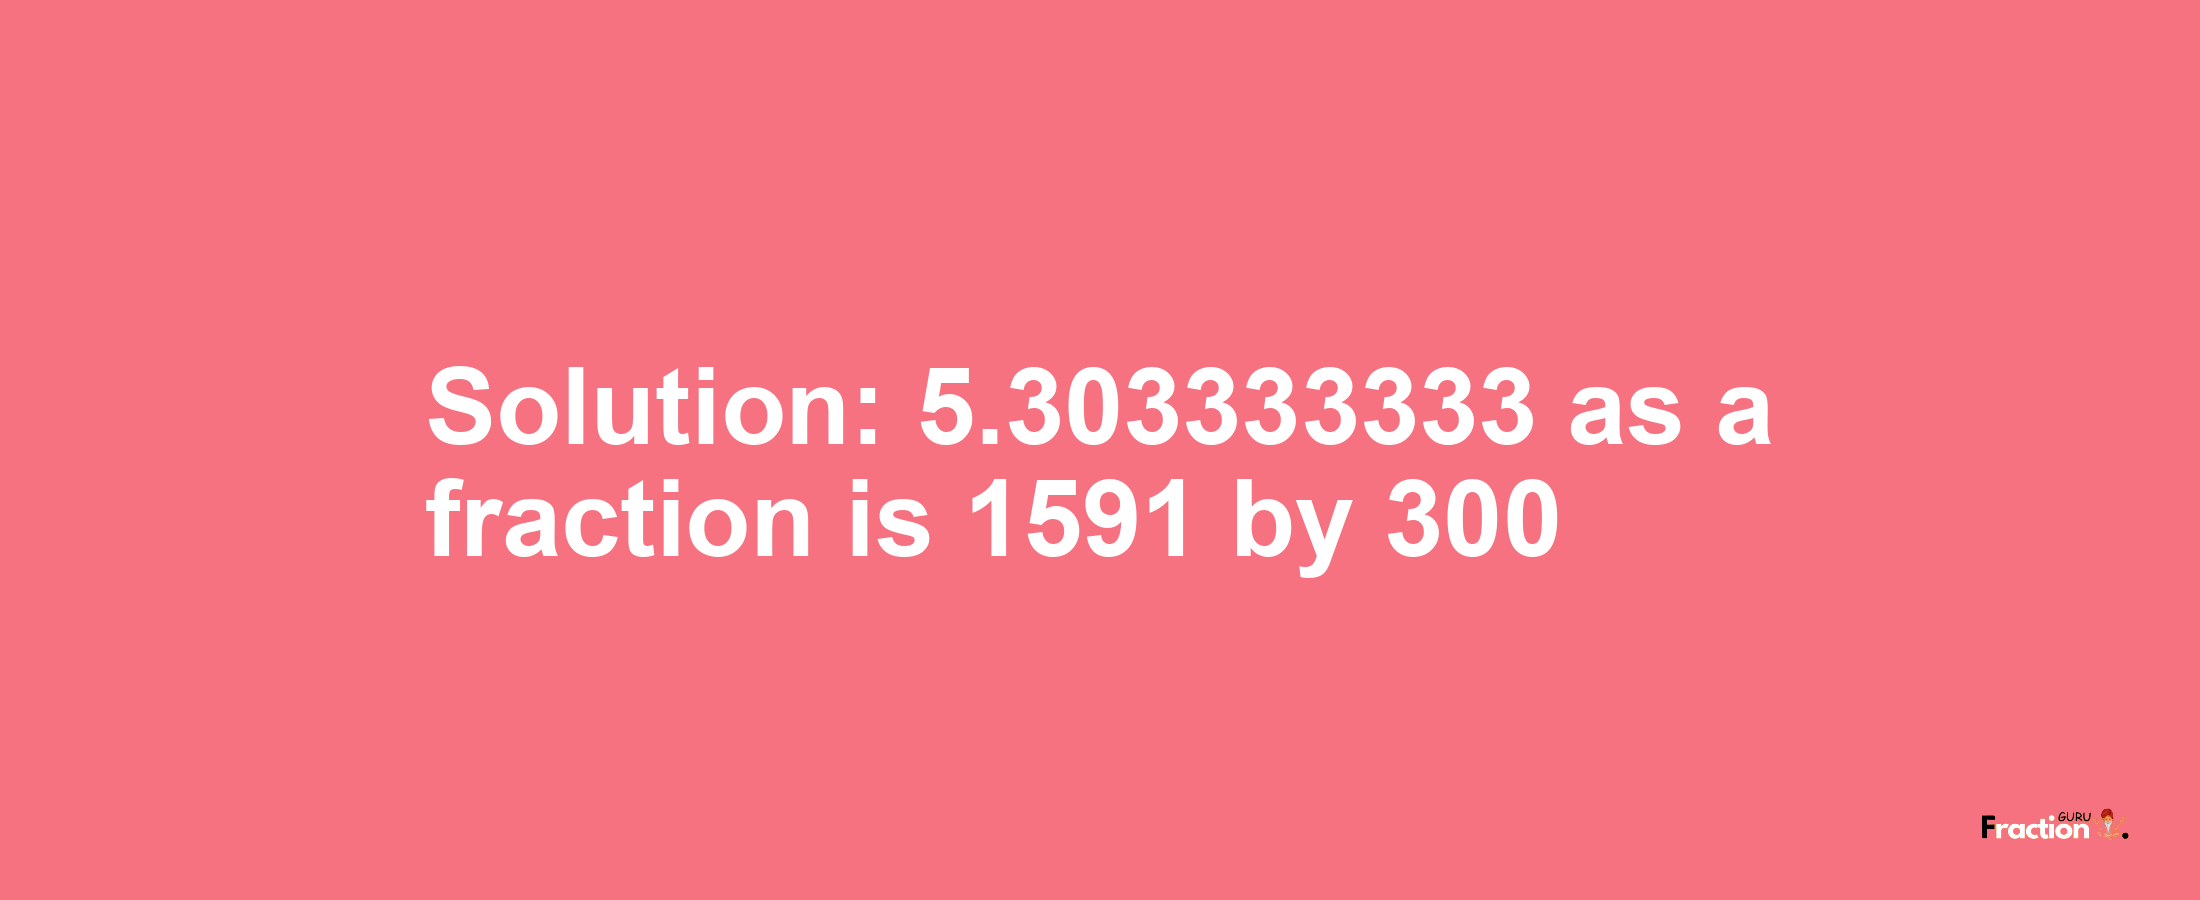 Solution:5.303333333 as a fraction is 1591/300